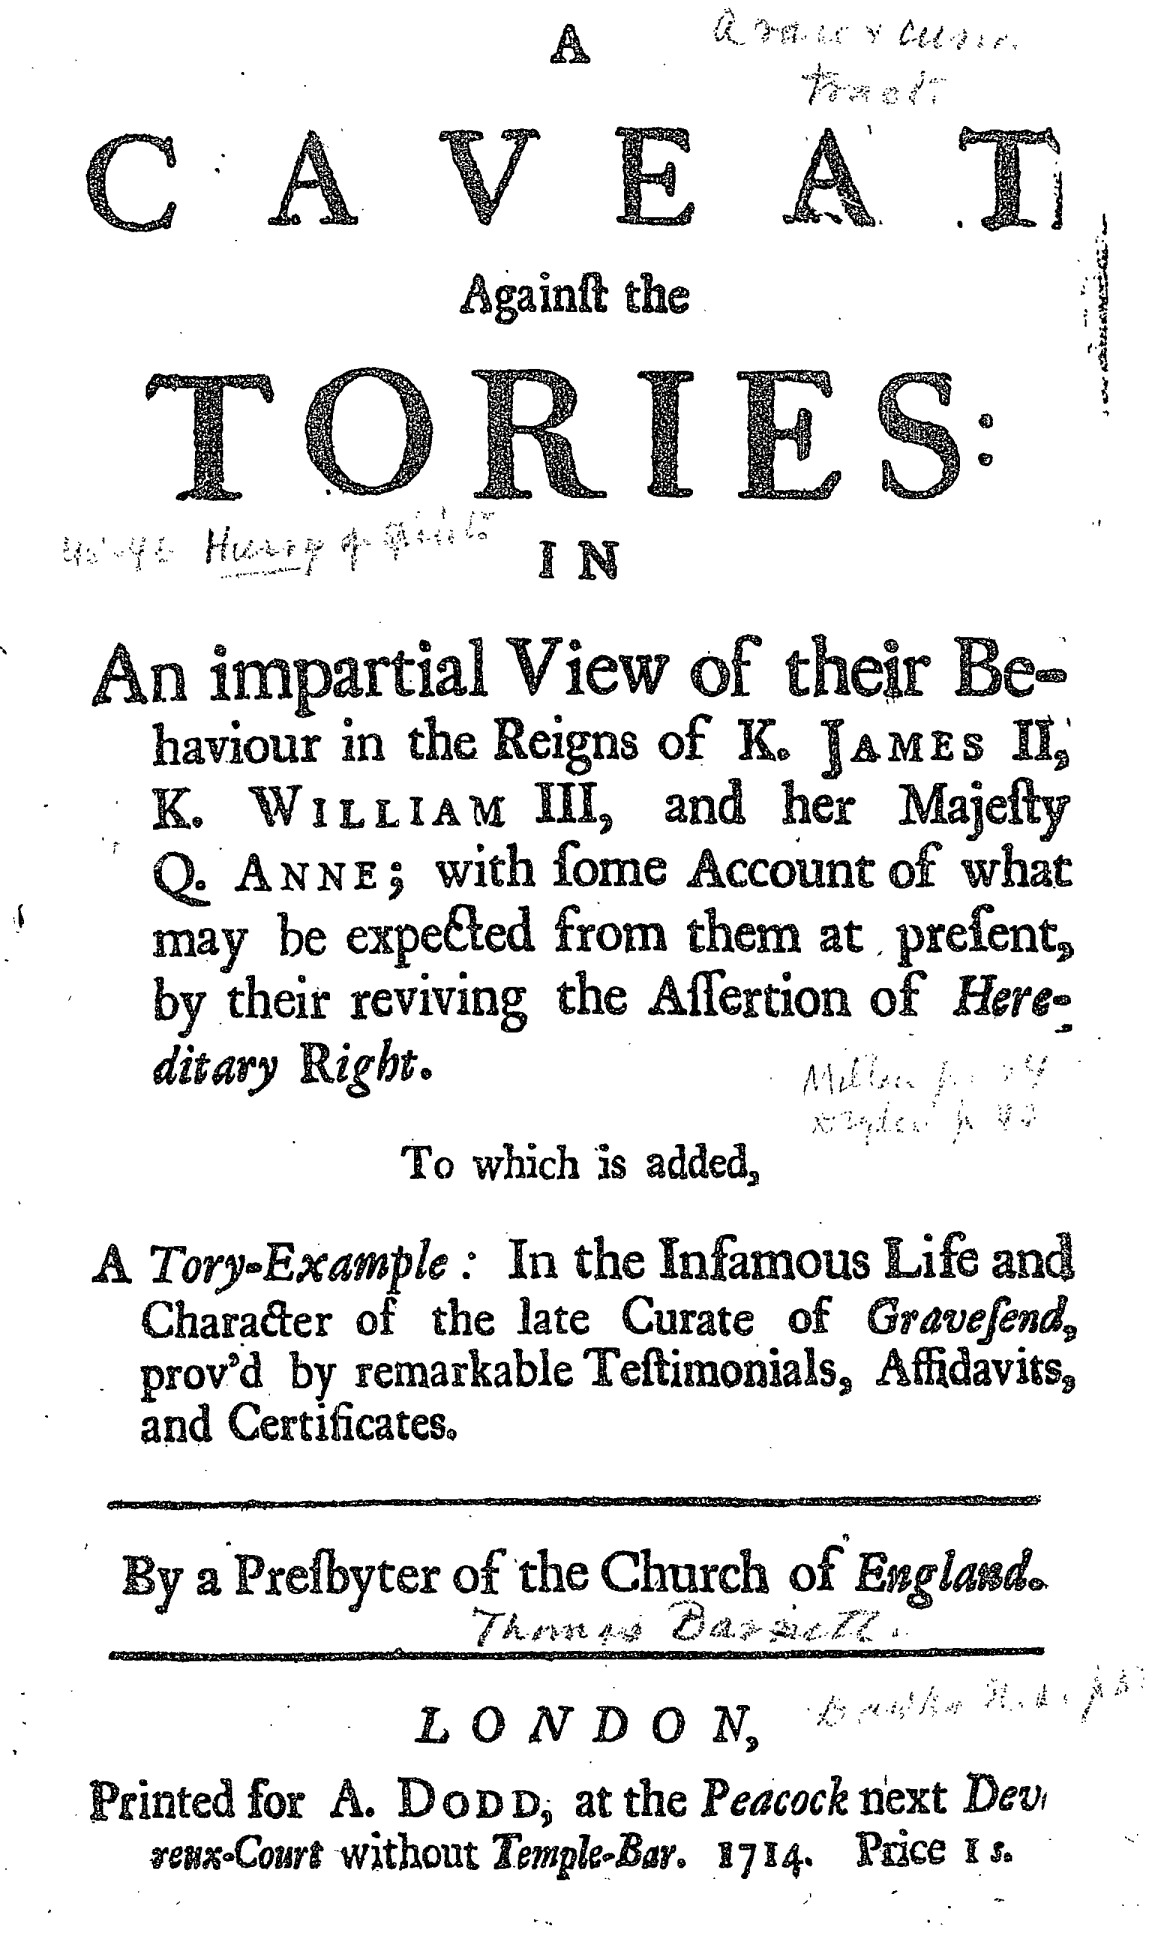 An image of "A caveat against the Tories" from 1714. The imprint reads "Printed for A. Dodd, at the Peacock next Devreux-Court without Temple-Bar"